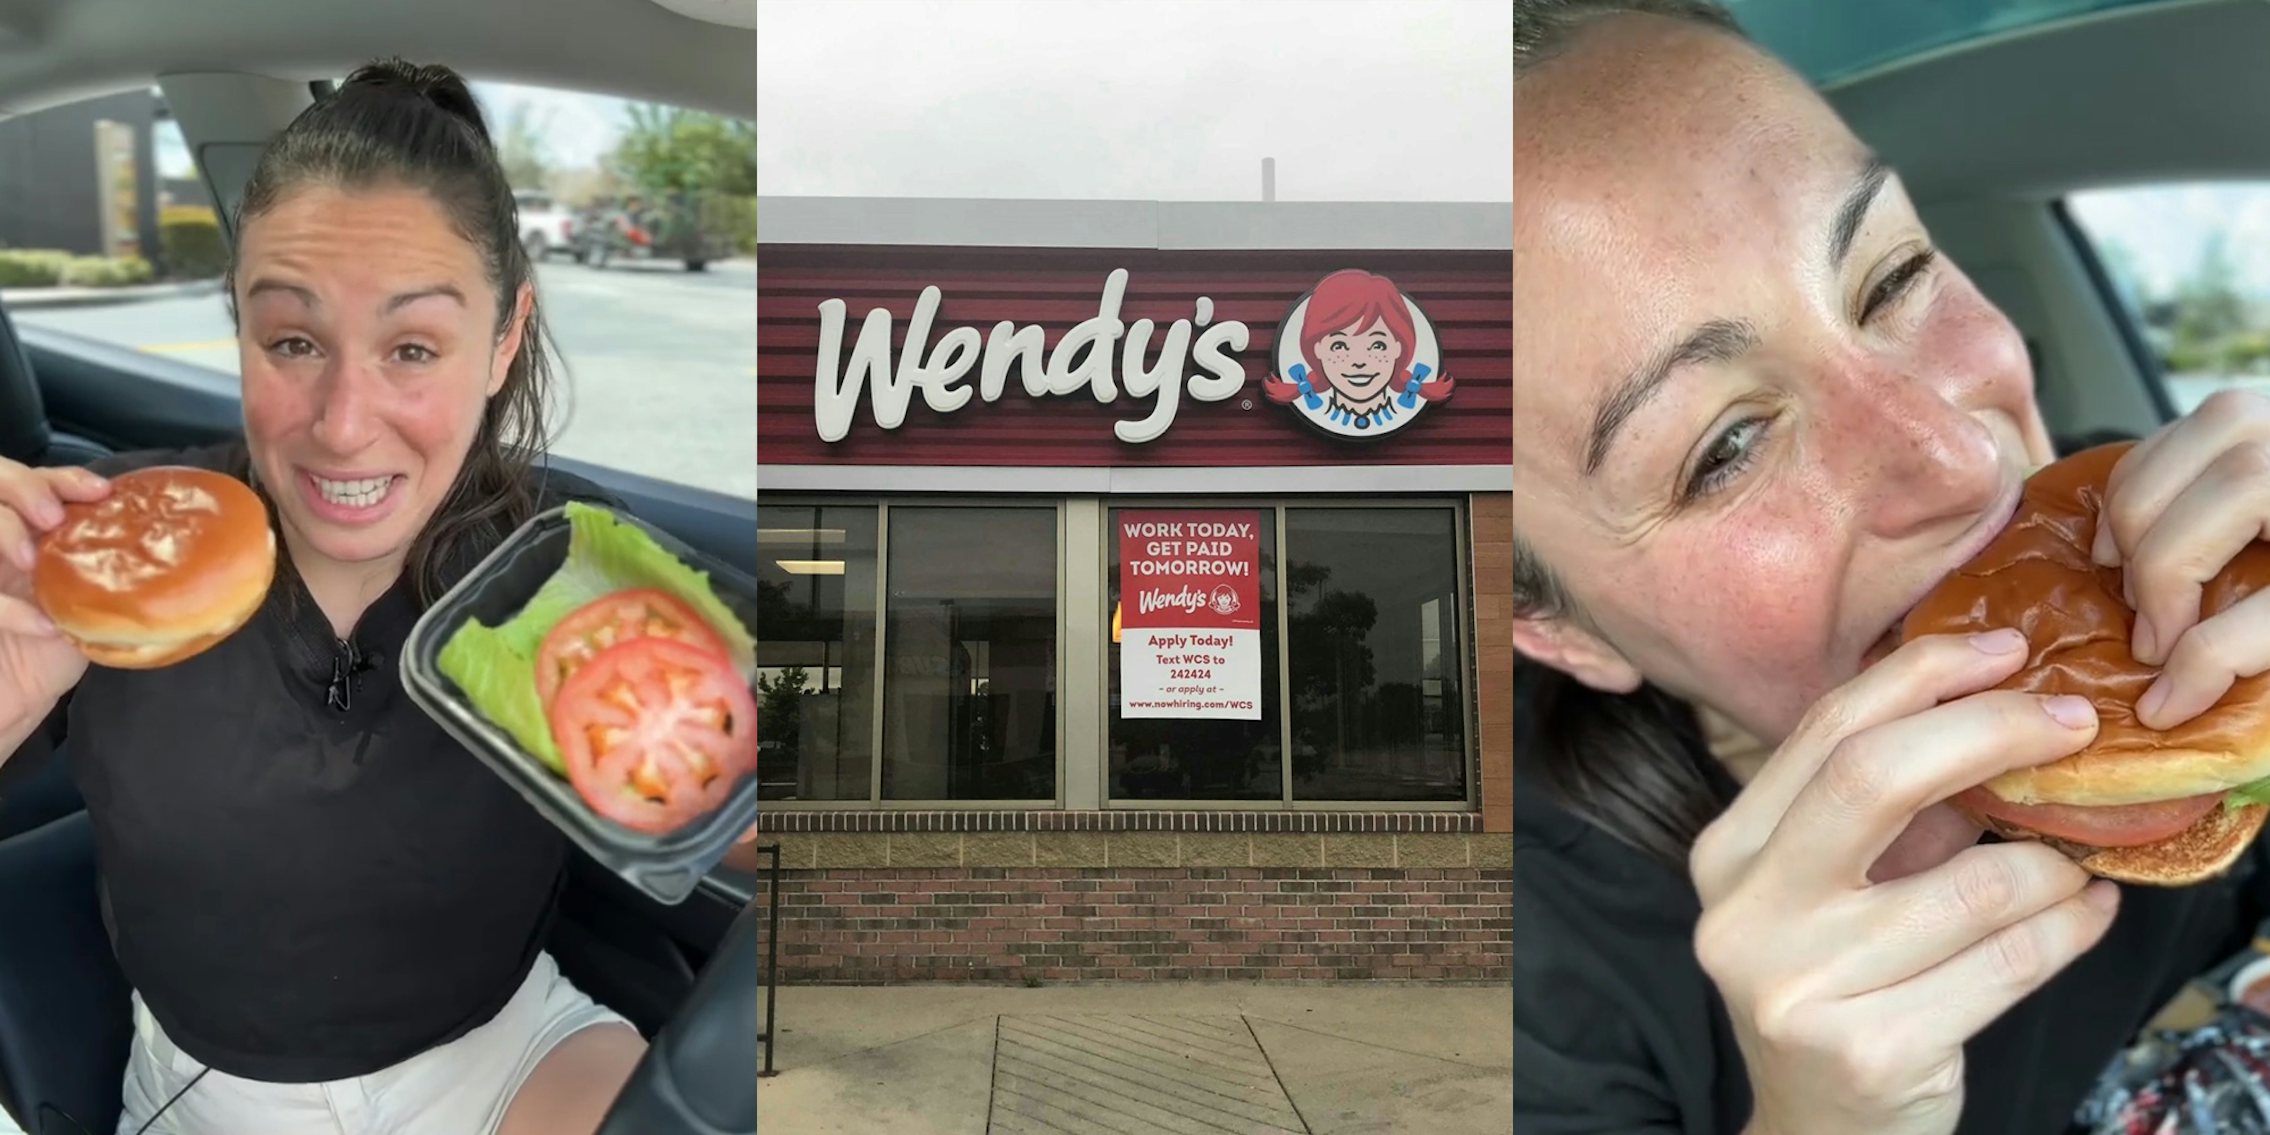 Wendy's customer in car with buns and sides in container in hand (l) Wendy's building with sign (c) Wendy's customer eating burger in car (r)